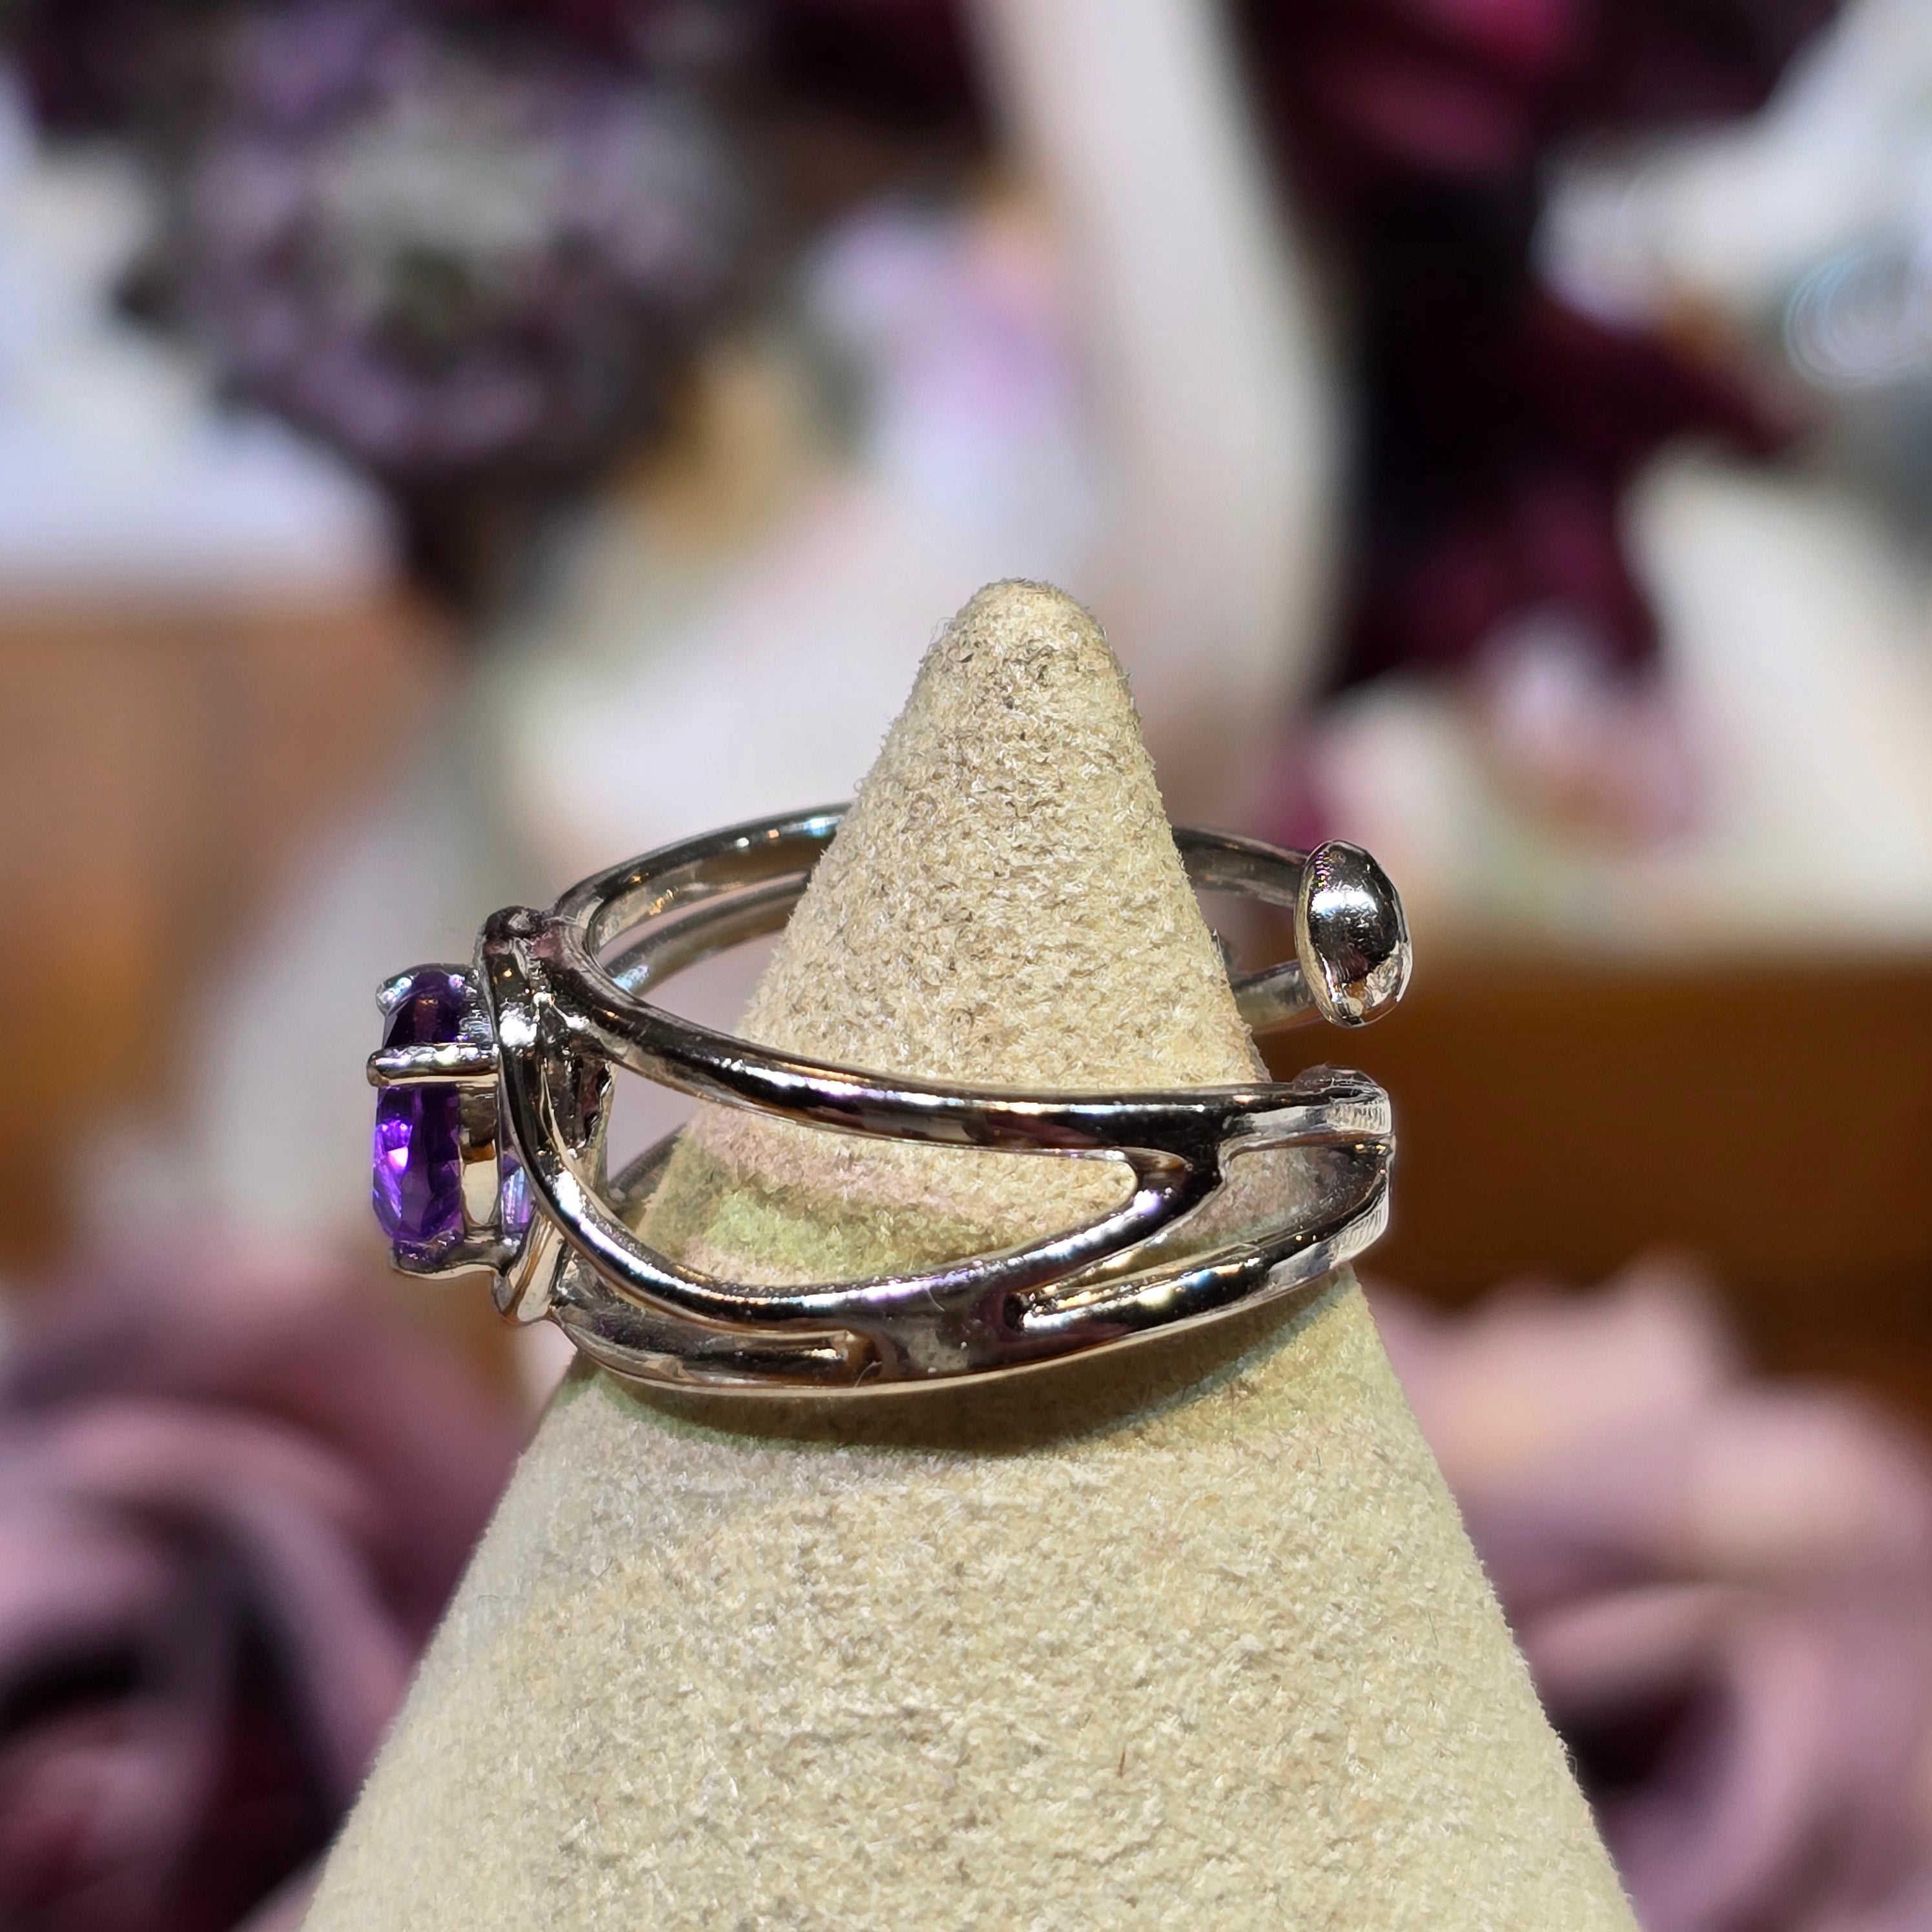 Amethyst Heart Midi Adjustable Finger Cuff Ring .925 Silver for Divine Connection, Intuition and Energy Purification